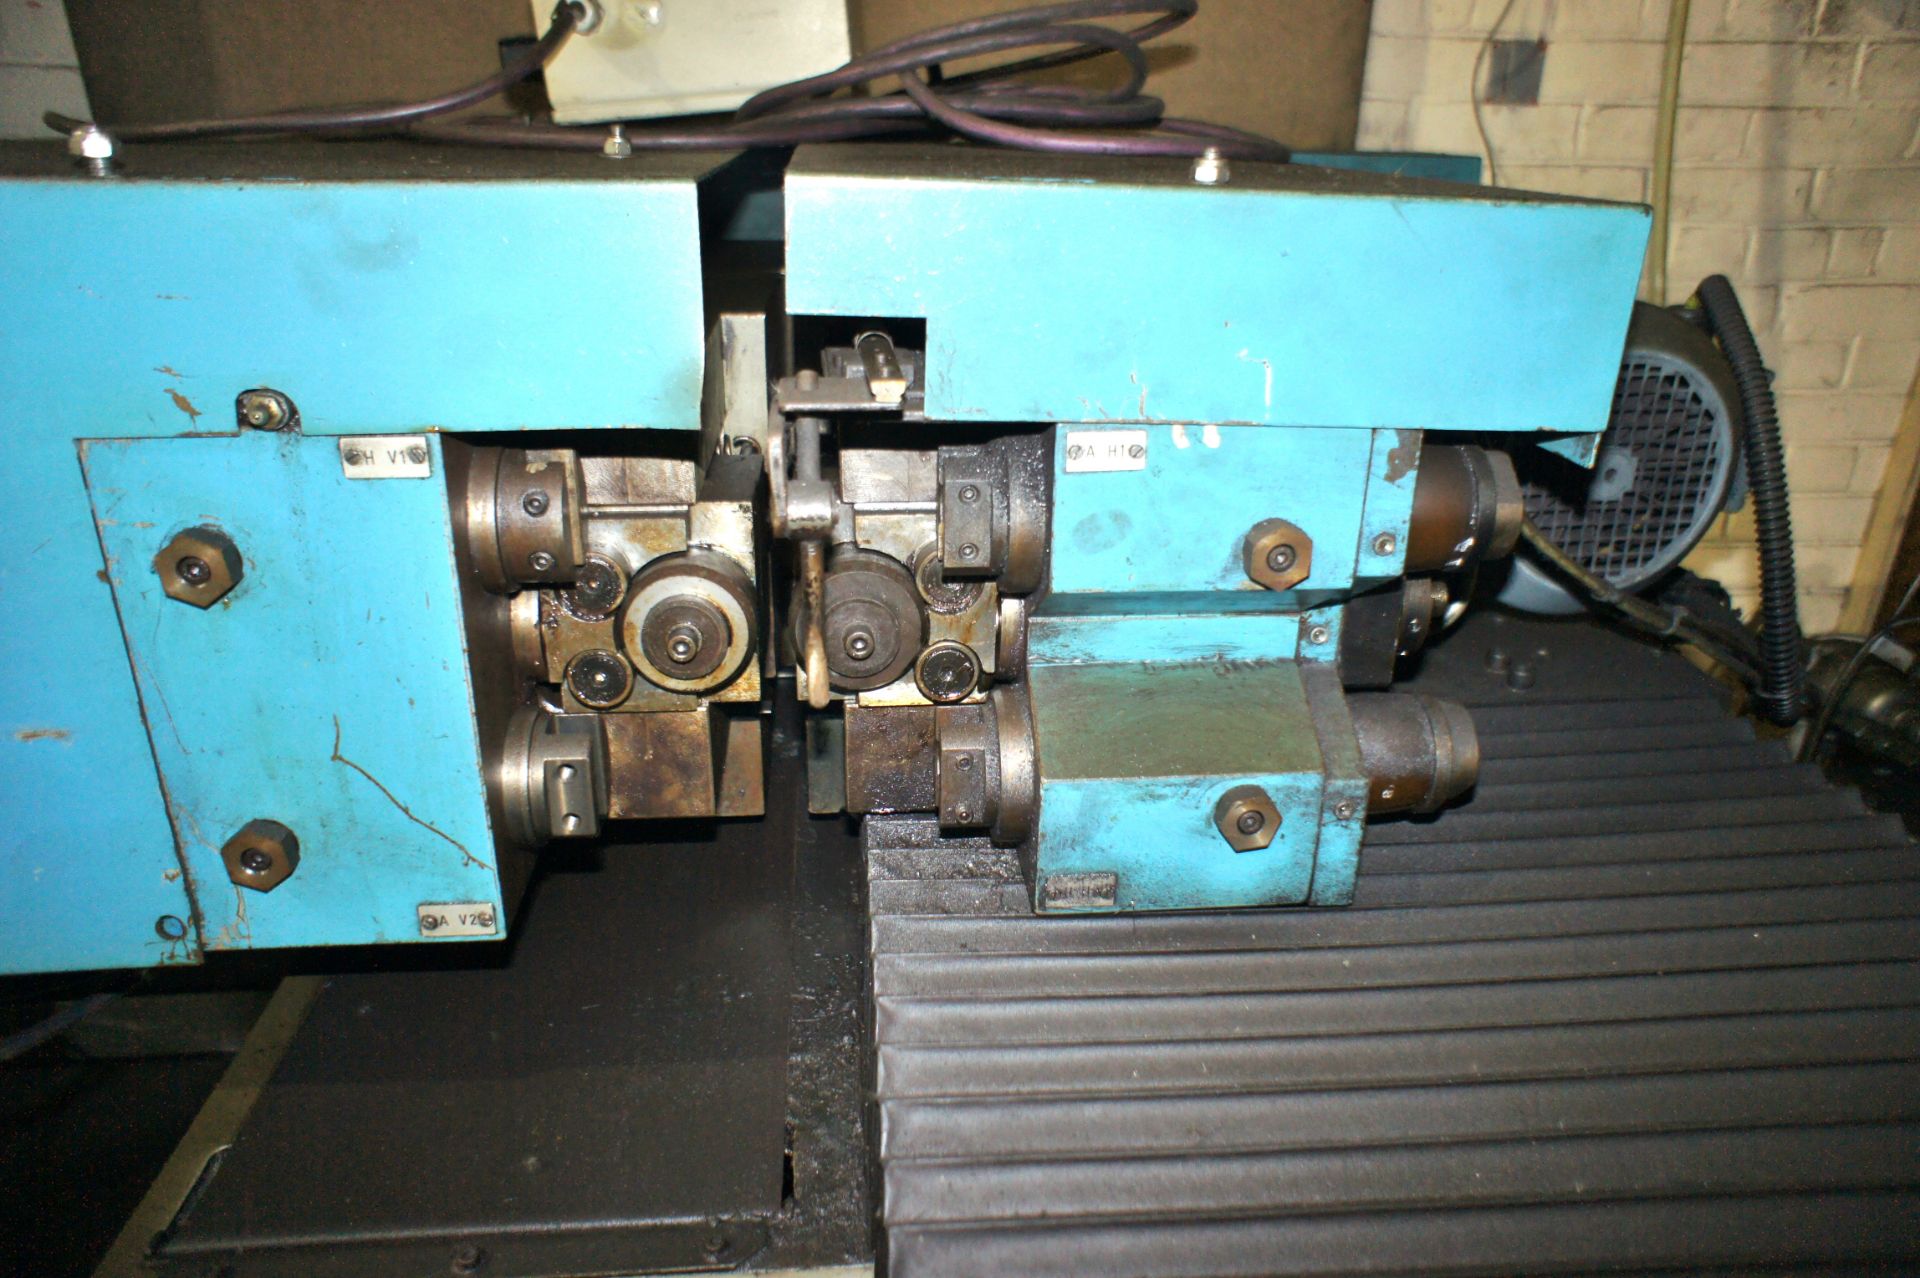 Mummenhoff Technologies PSR 700 automatic smithing and tensioning machine, Serial no. 10309 (2003) - Image 5 of 9